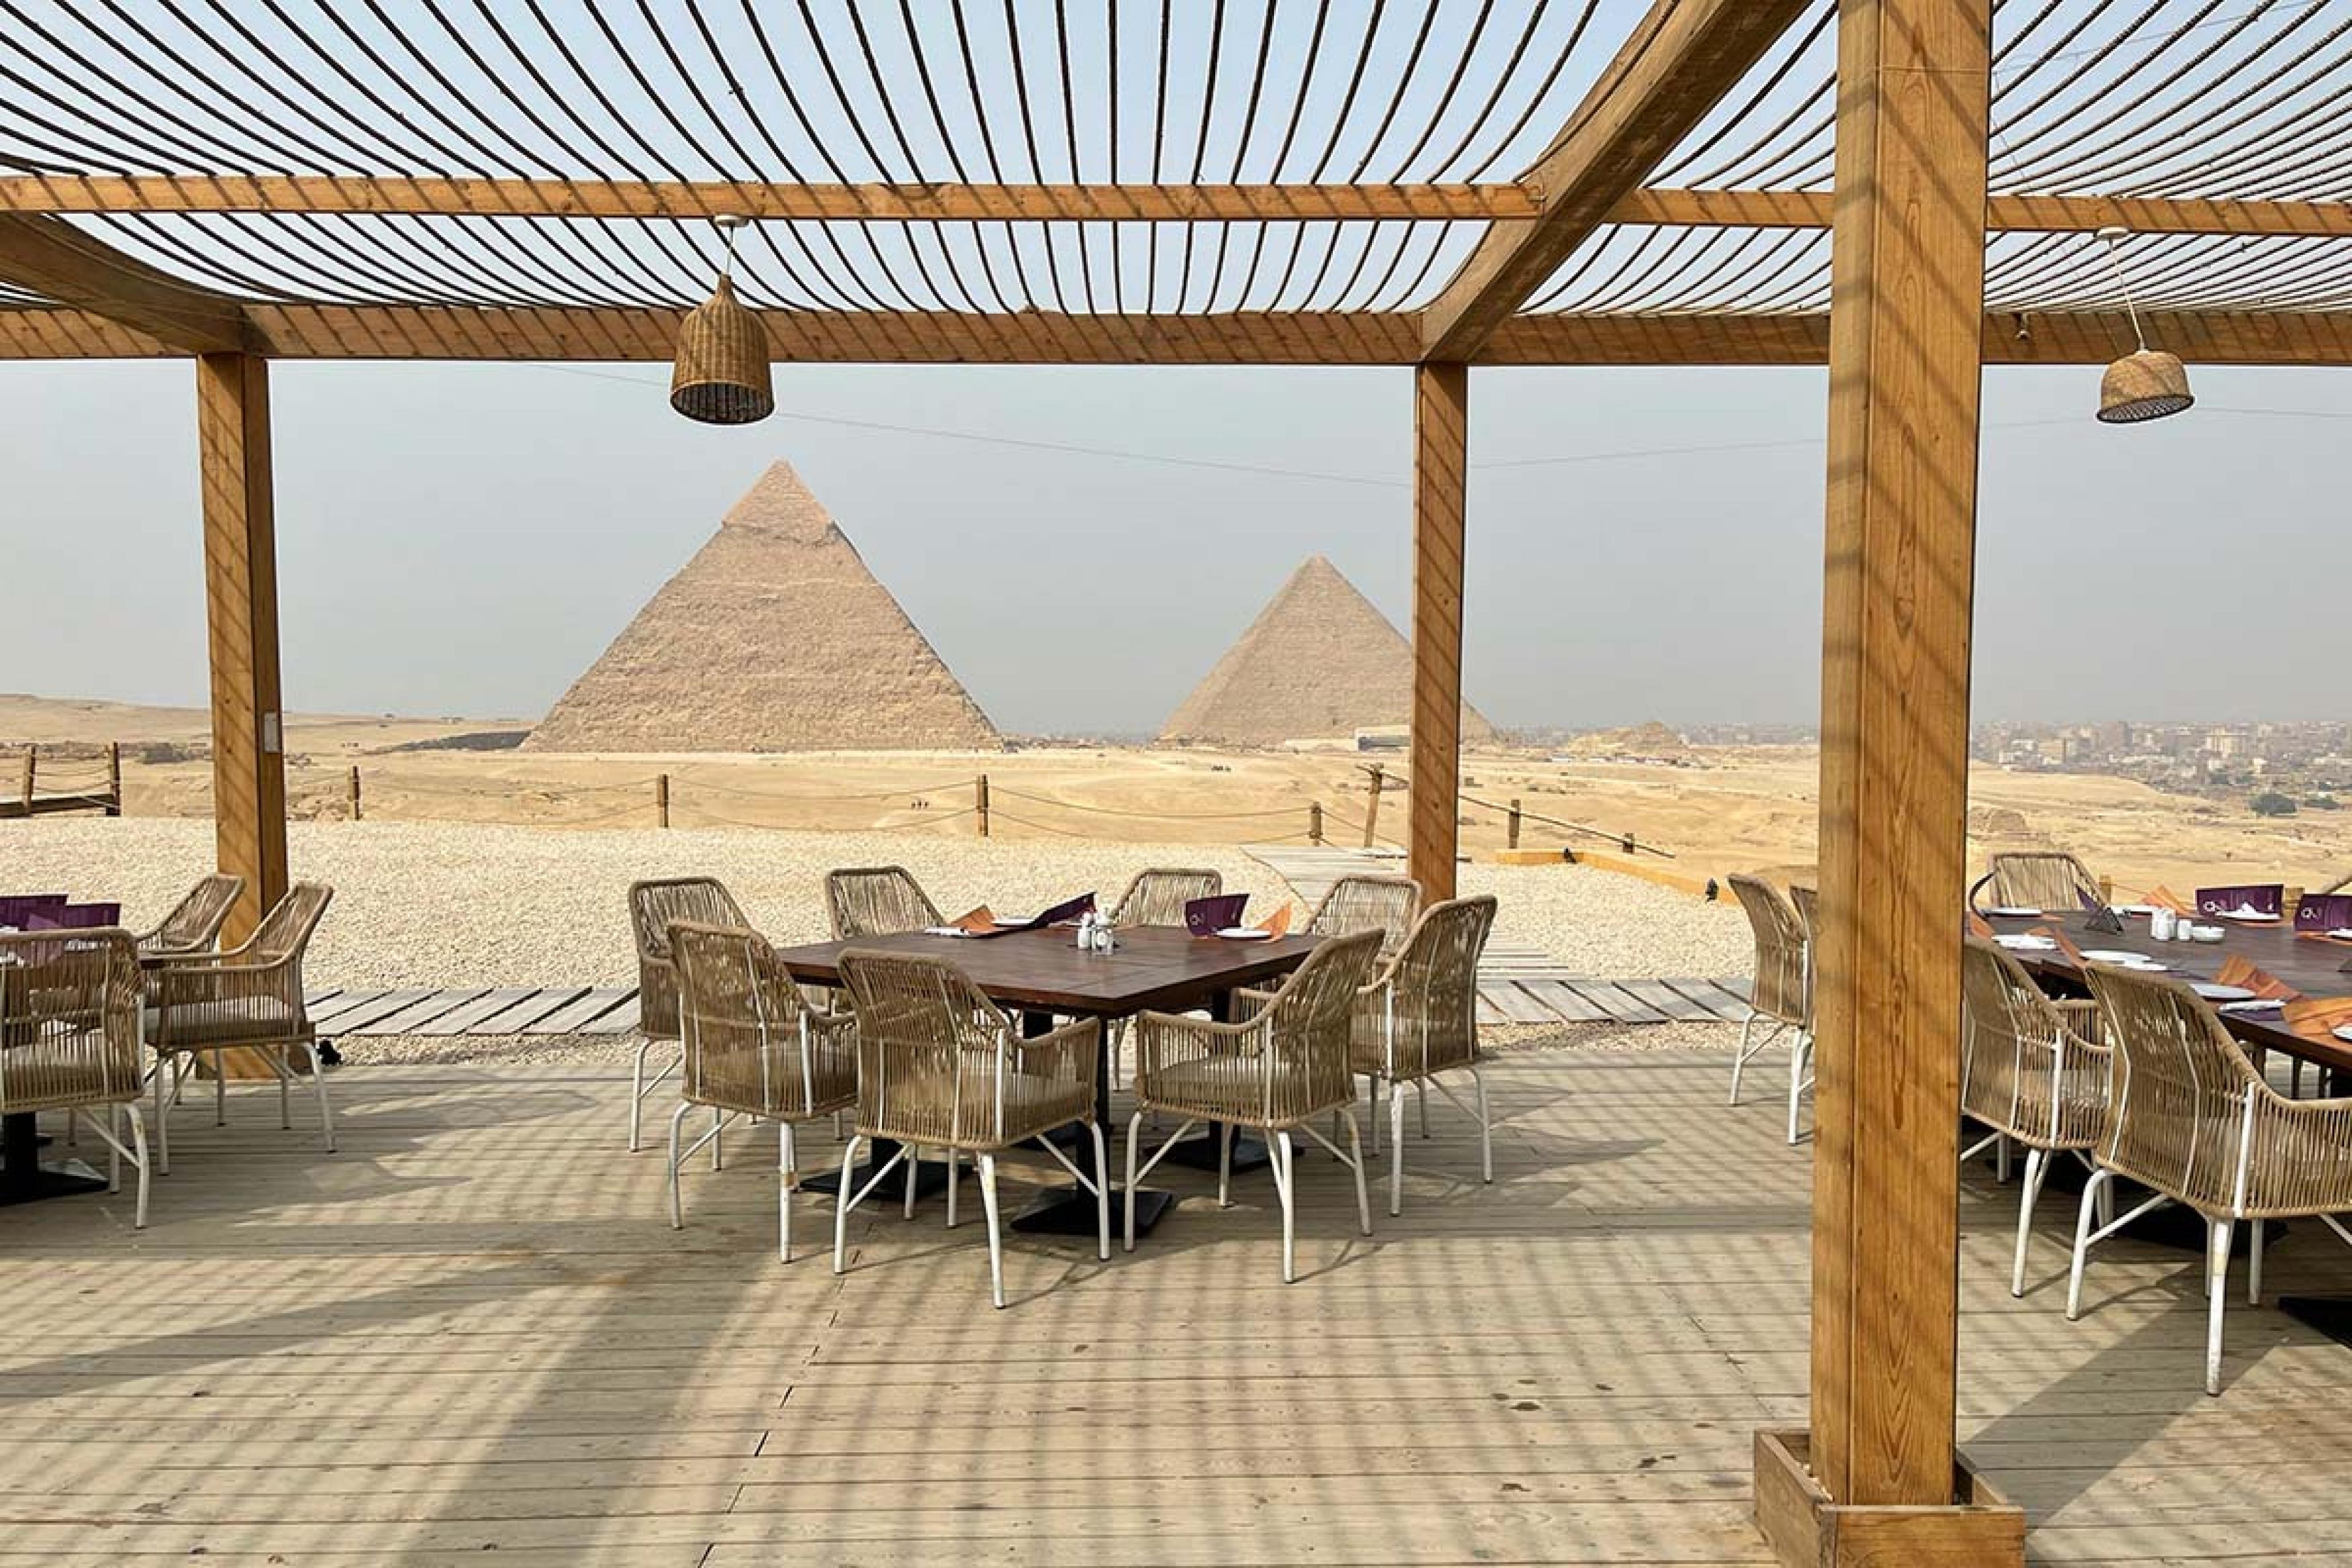 dining tables beneath a wooden structure with the pyramids in the background